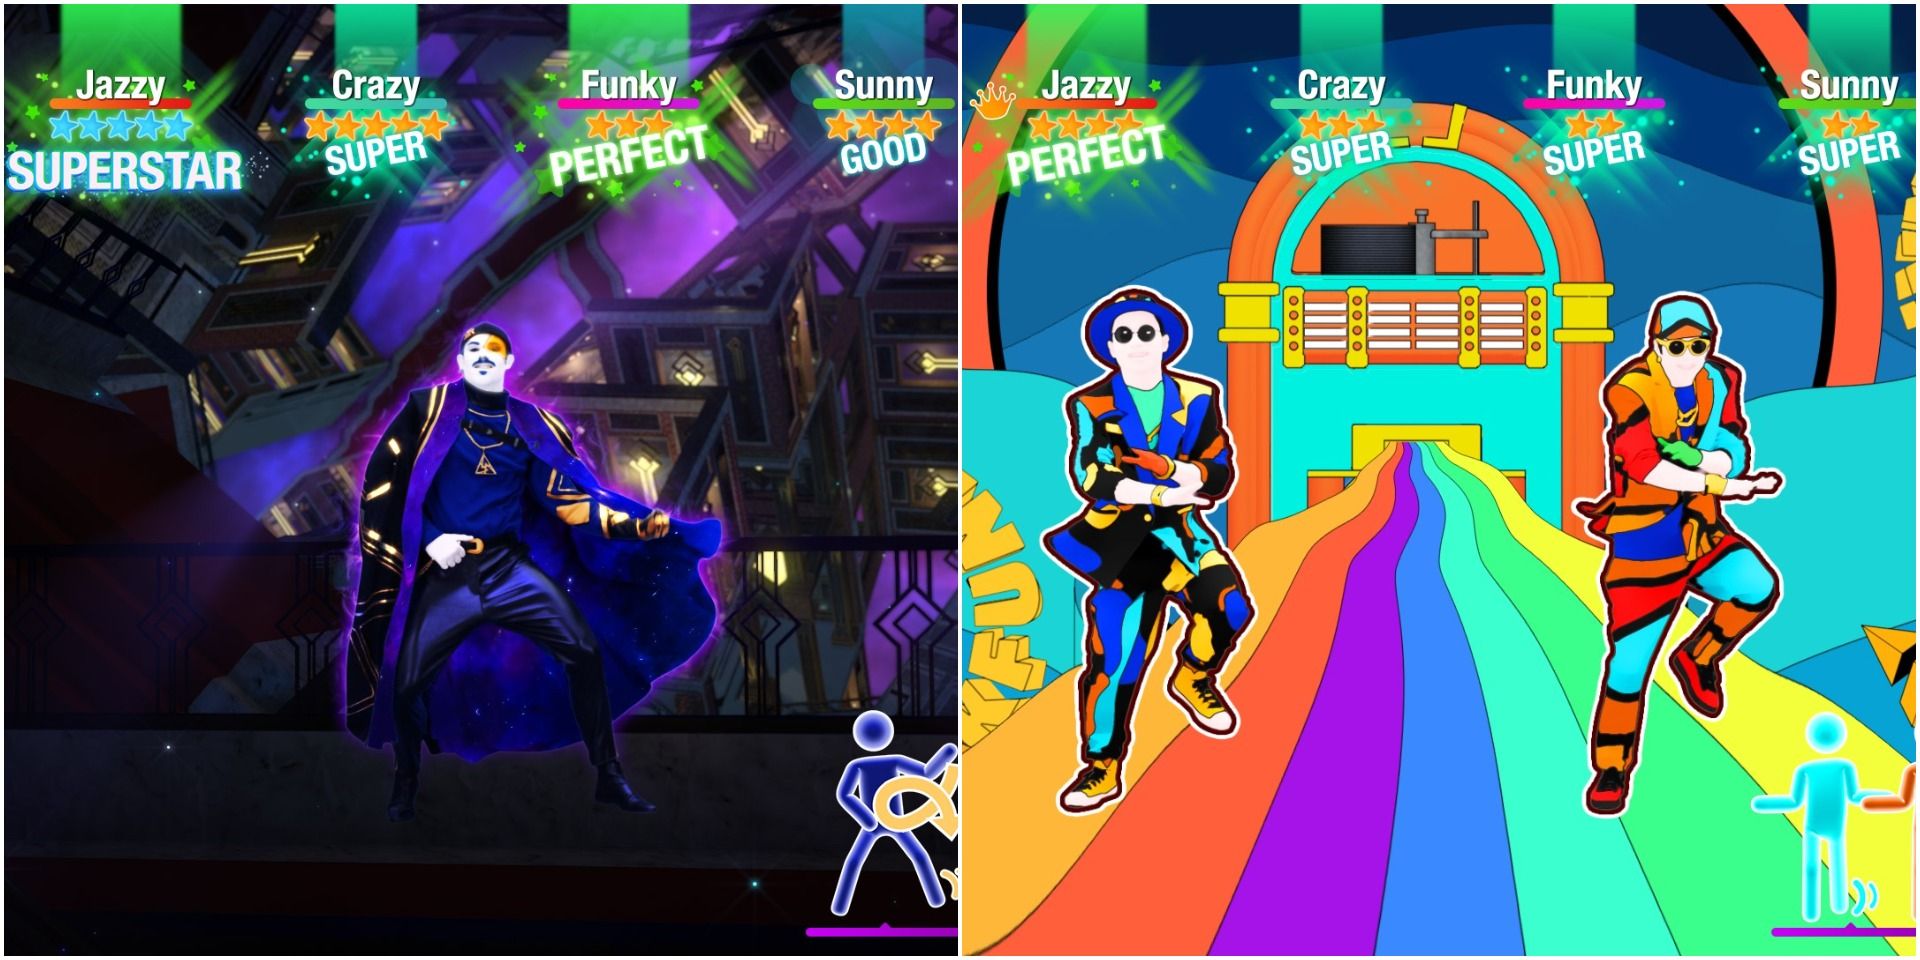 A collage showing gameplay in Just Dance 2022